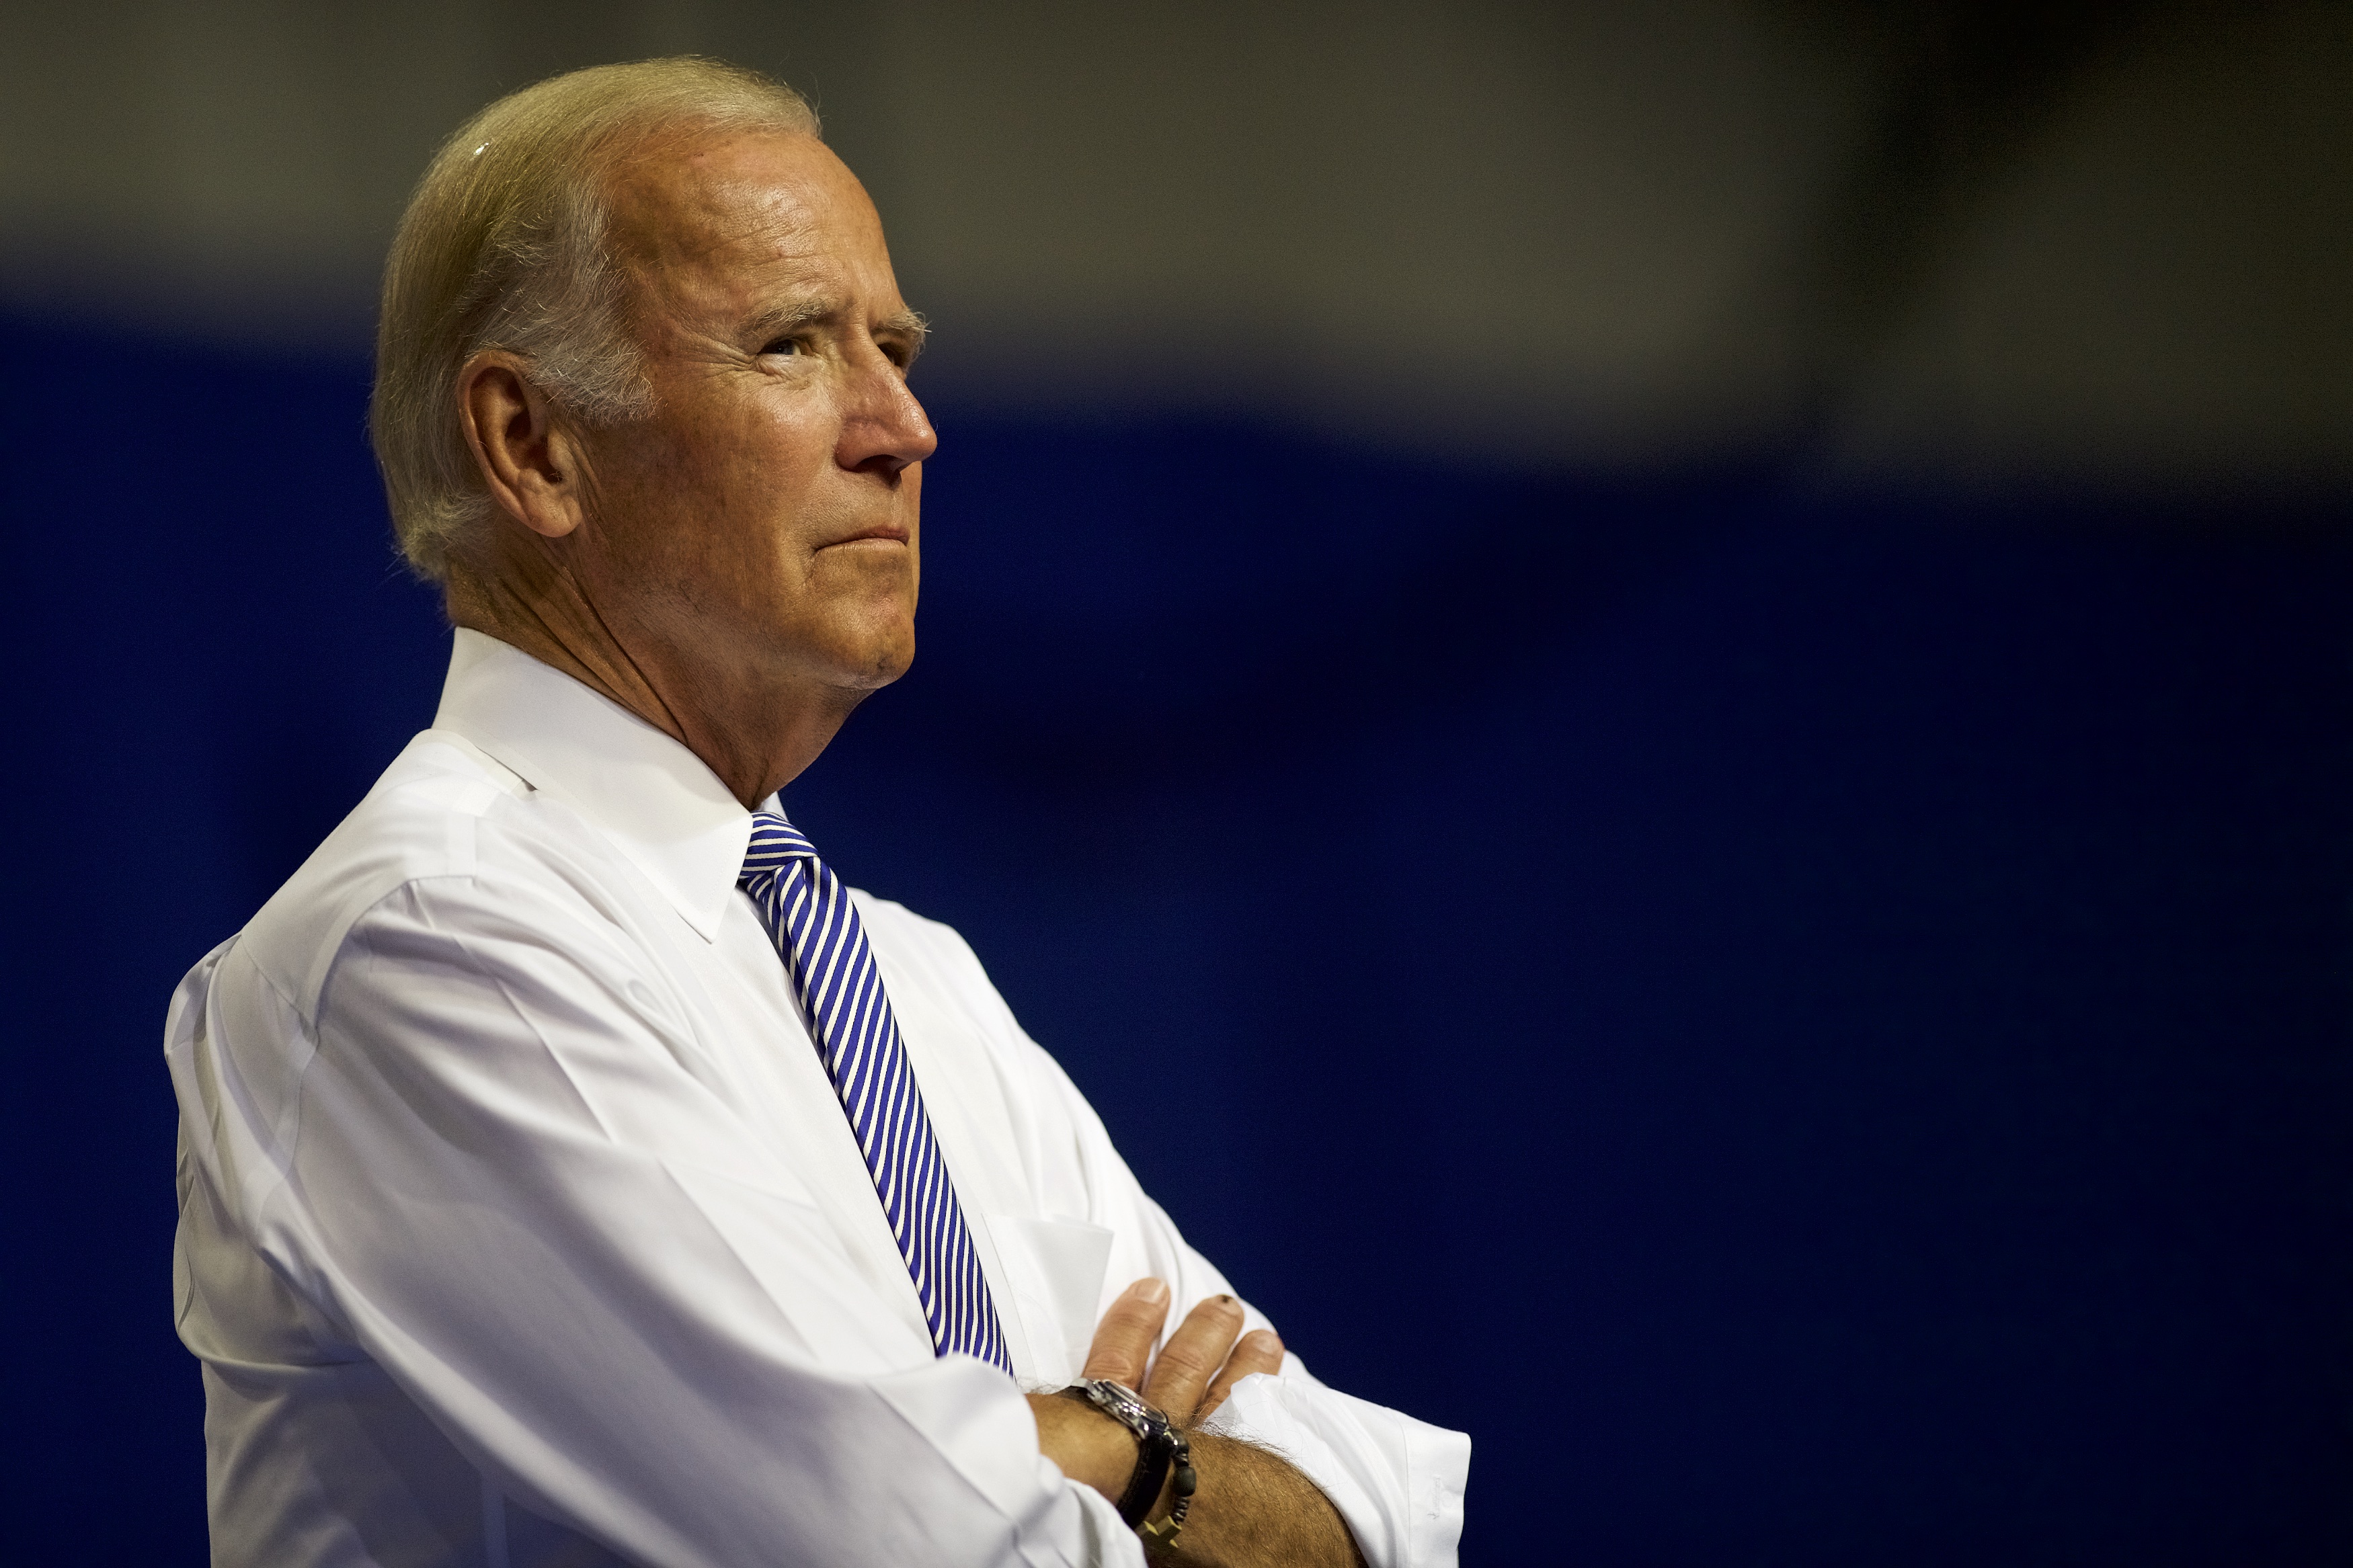 U.S. Vice President Joe Biden listens as Democratic Presidential candidate Hillary Clinton delivers remarks at Riverfront Sports athletic facility on August 15, 2016 in Scranton, Pennsylvania. (Mark Makela—Getty Images)